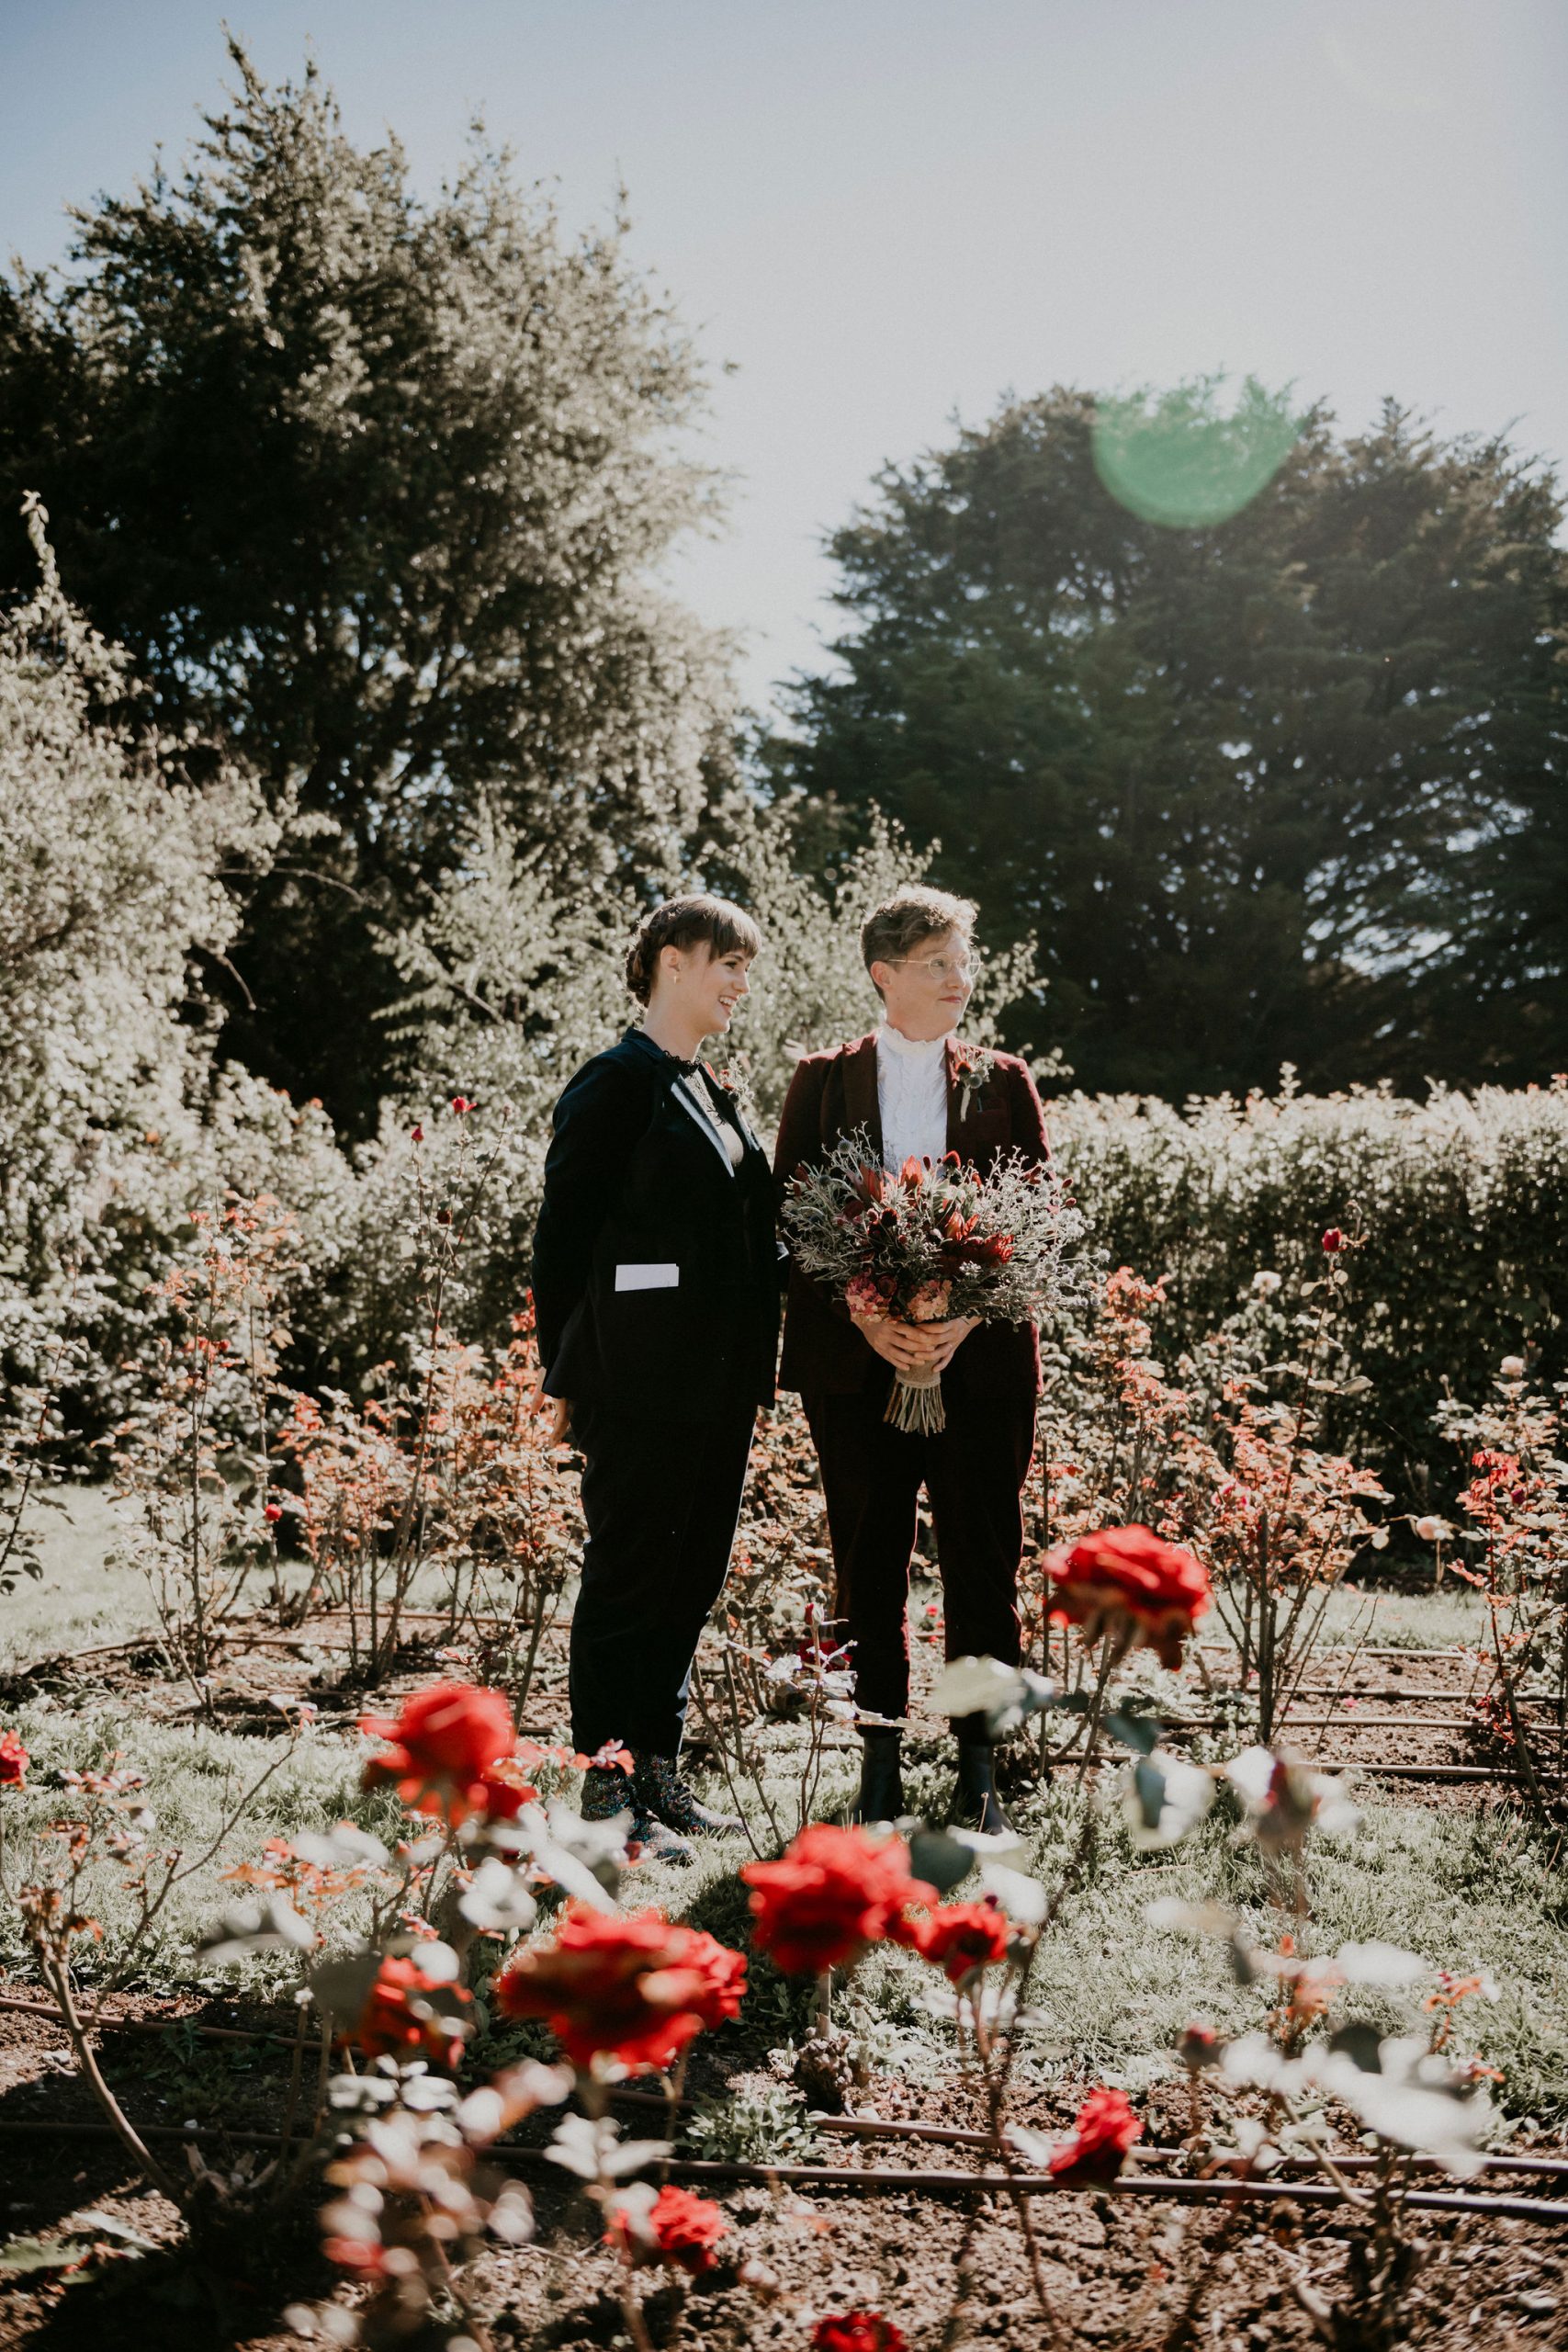 Couple stands sun drenched amongst roses during ceremony at rose farm Acre of Roses Elopement Lets Elope Melbourne Celebrant Photographer Elopement Package Victoria Sarah Matler Photography Acre of Roses Trentham intimate weddings